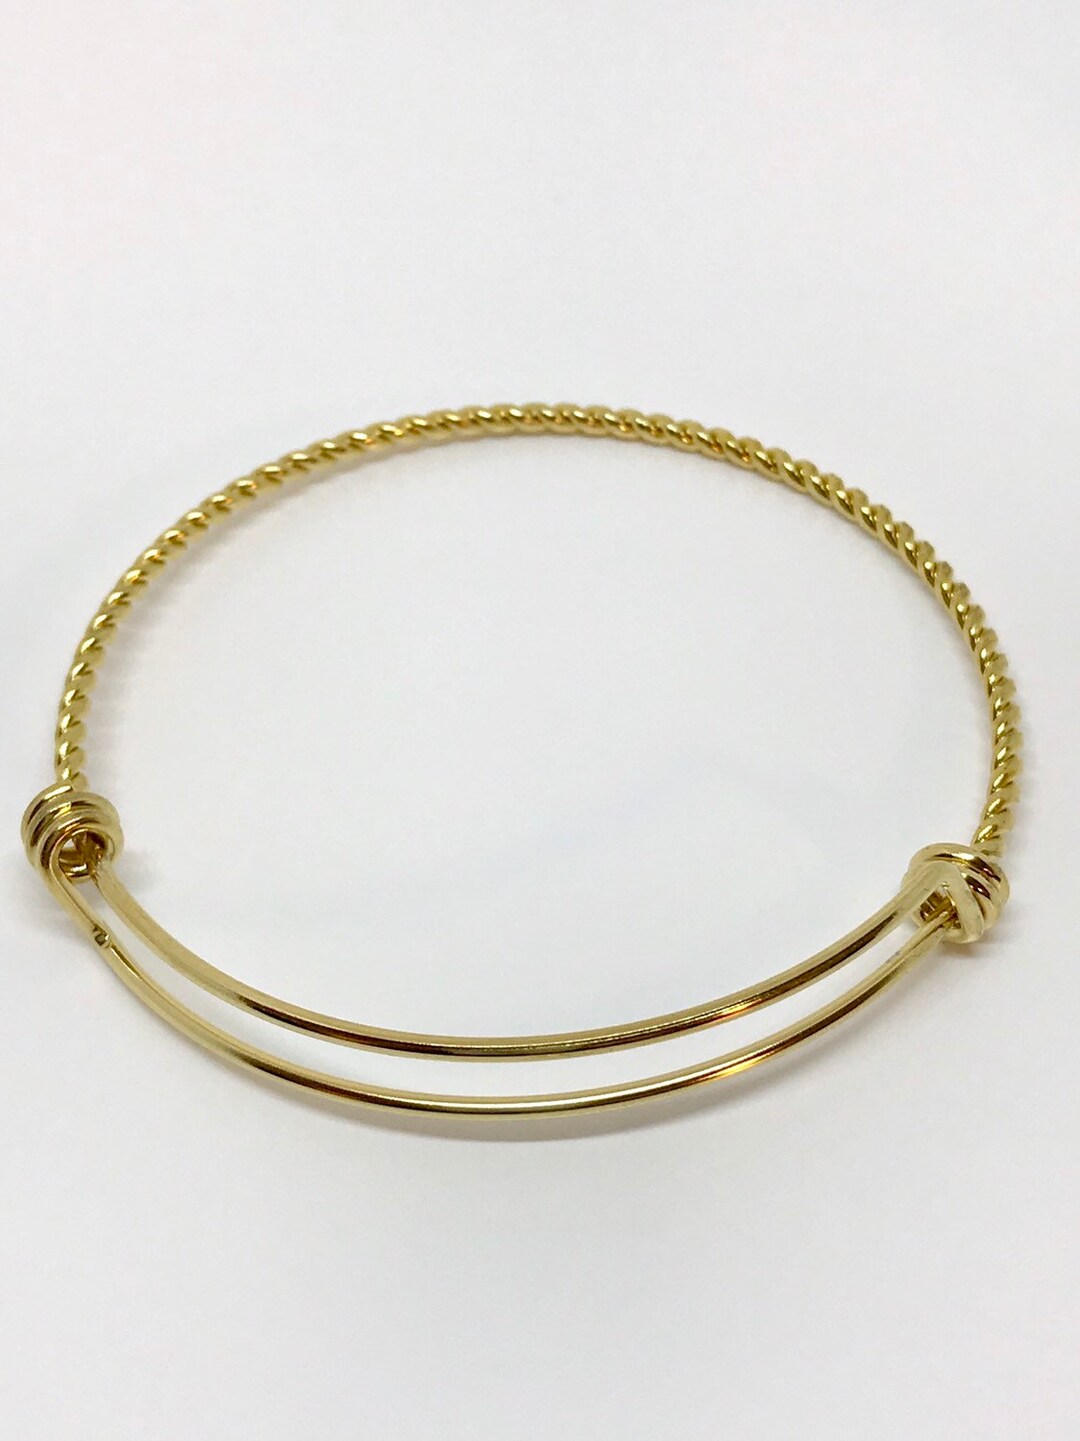 Beautiful 3D Rope Design Gold Stainless Steel Expandable - Etsy